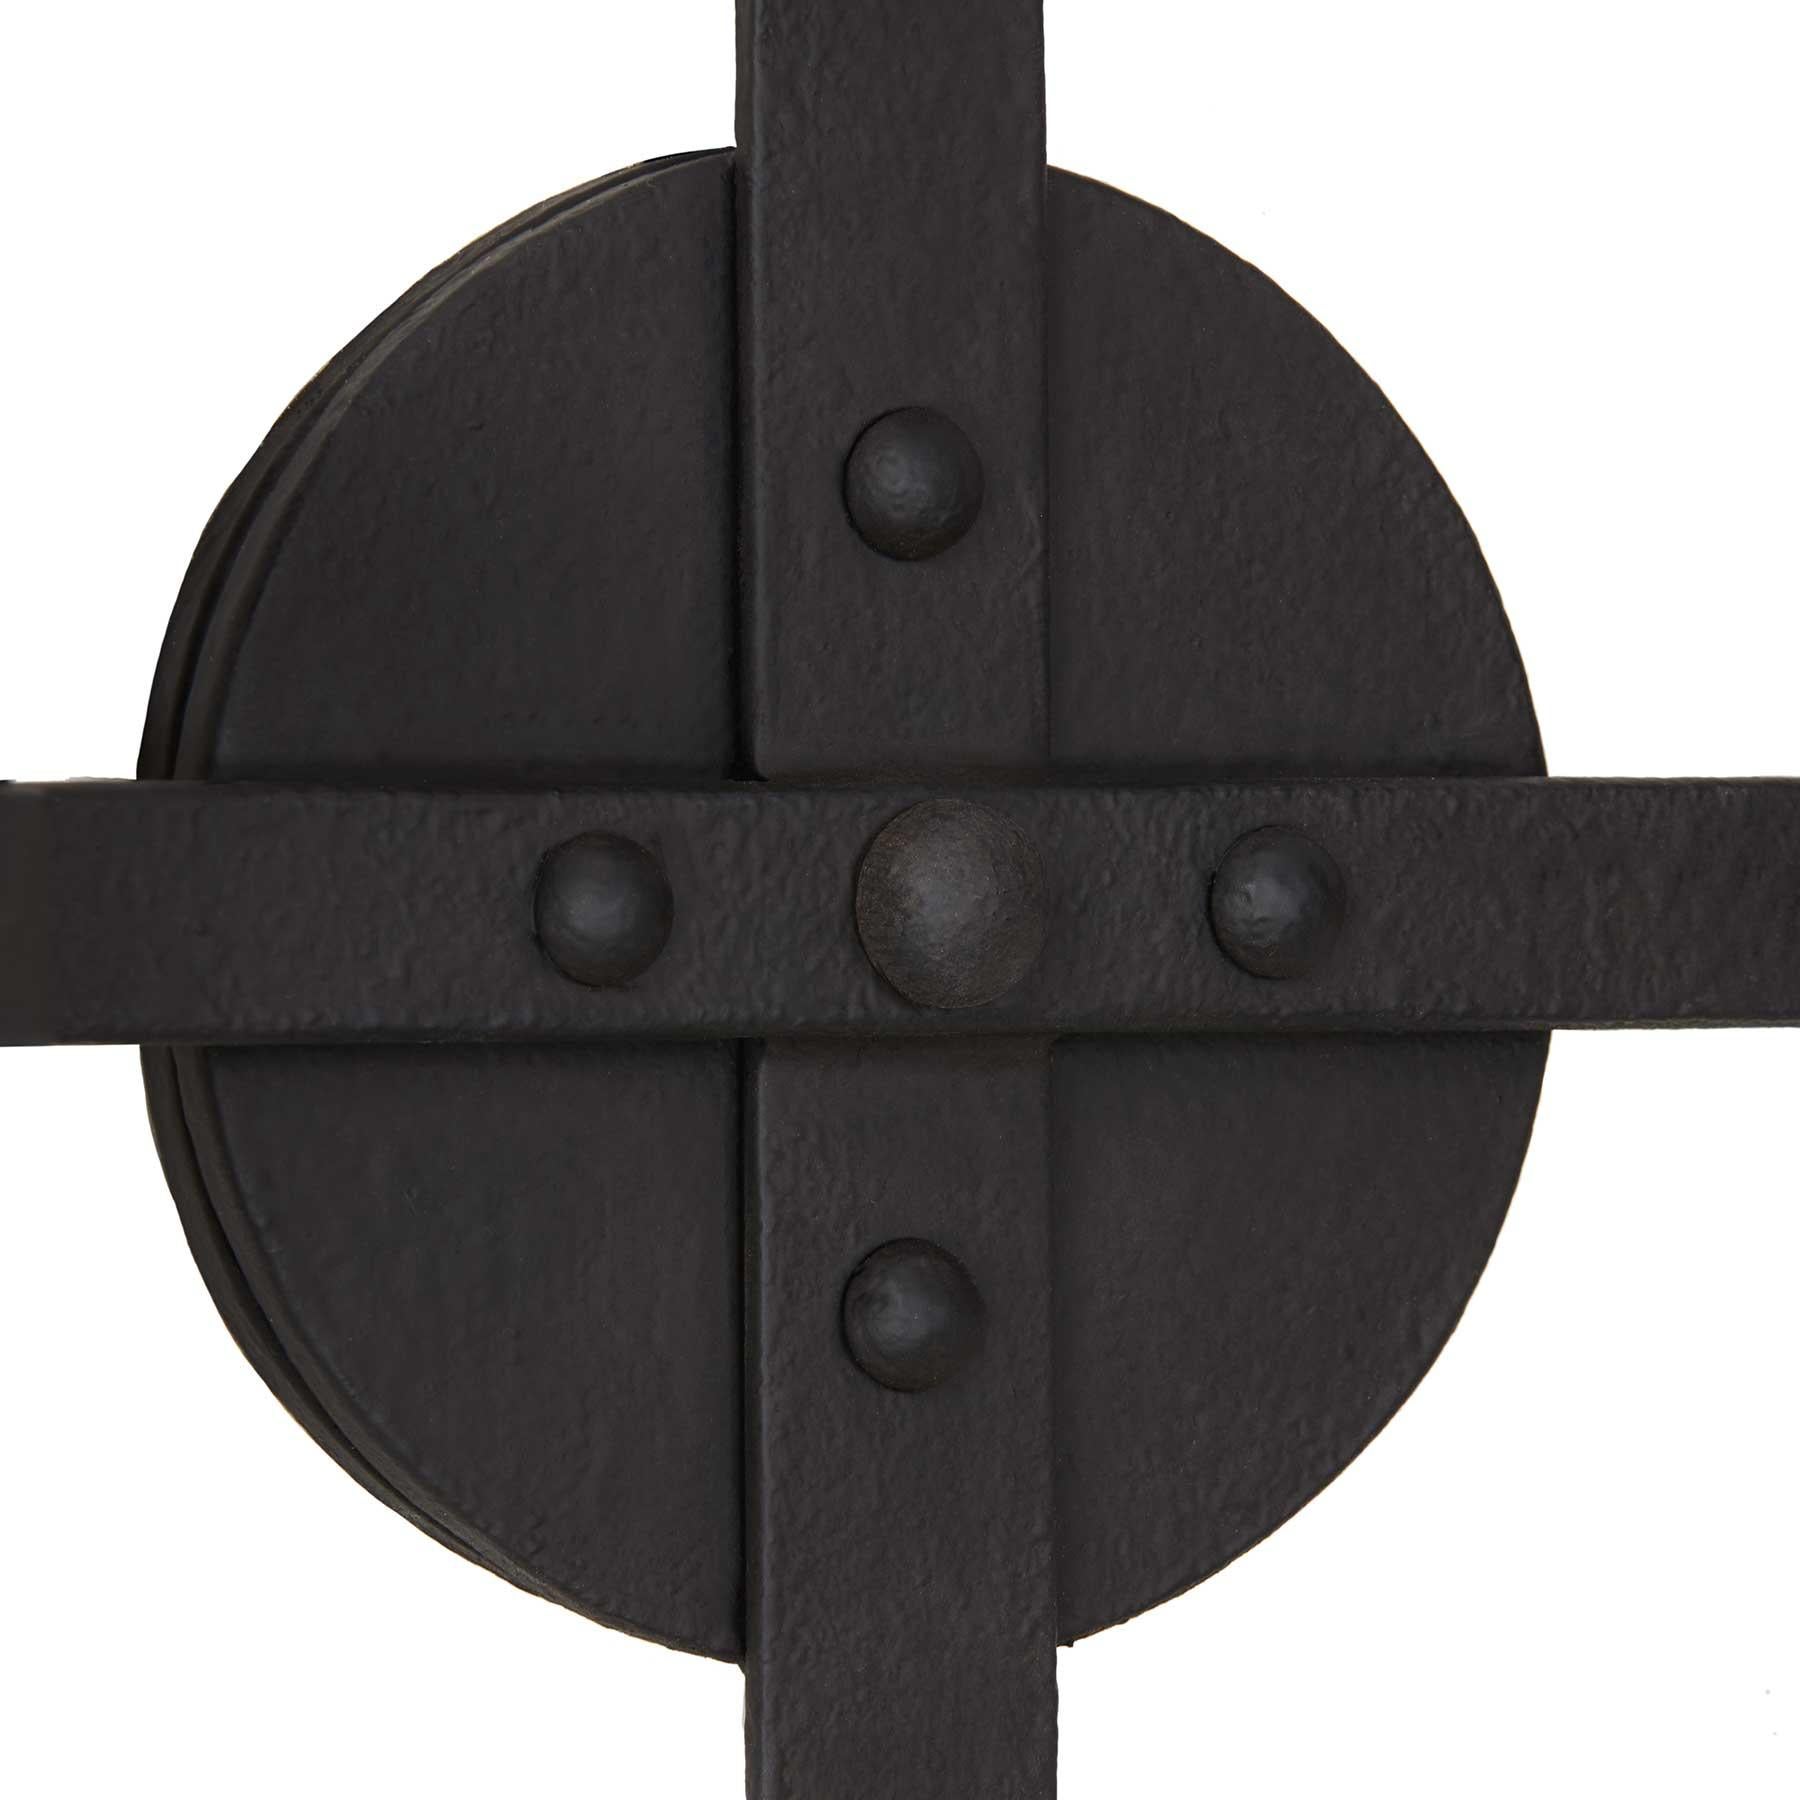 American  Hacienda Style Wall Sconce Spanish Colonial Wrought Iron Interior Light Fixture For Sale